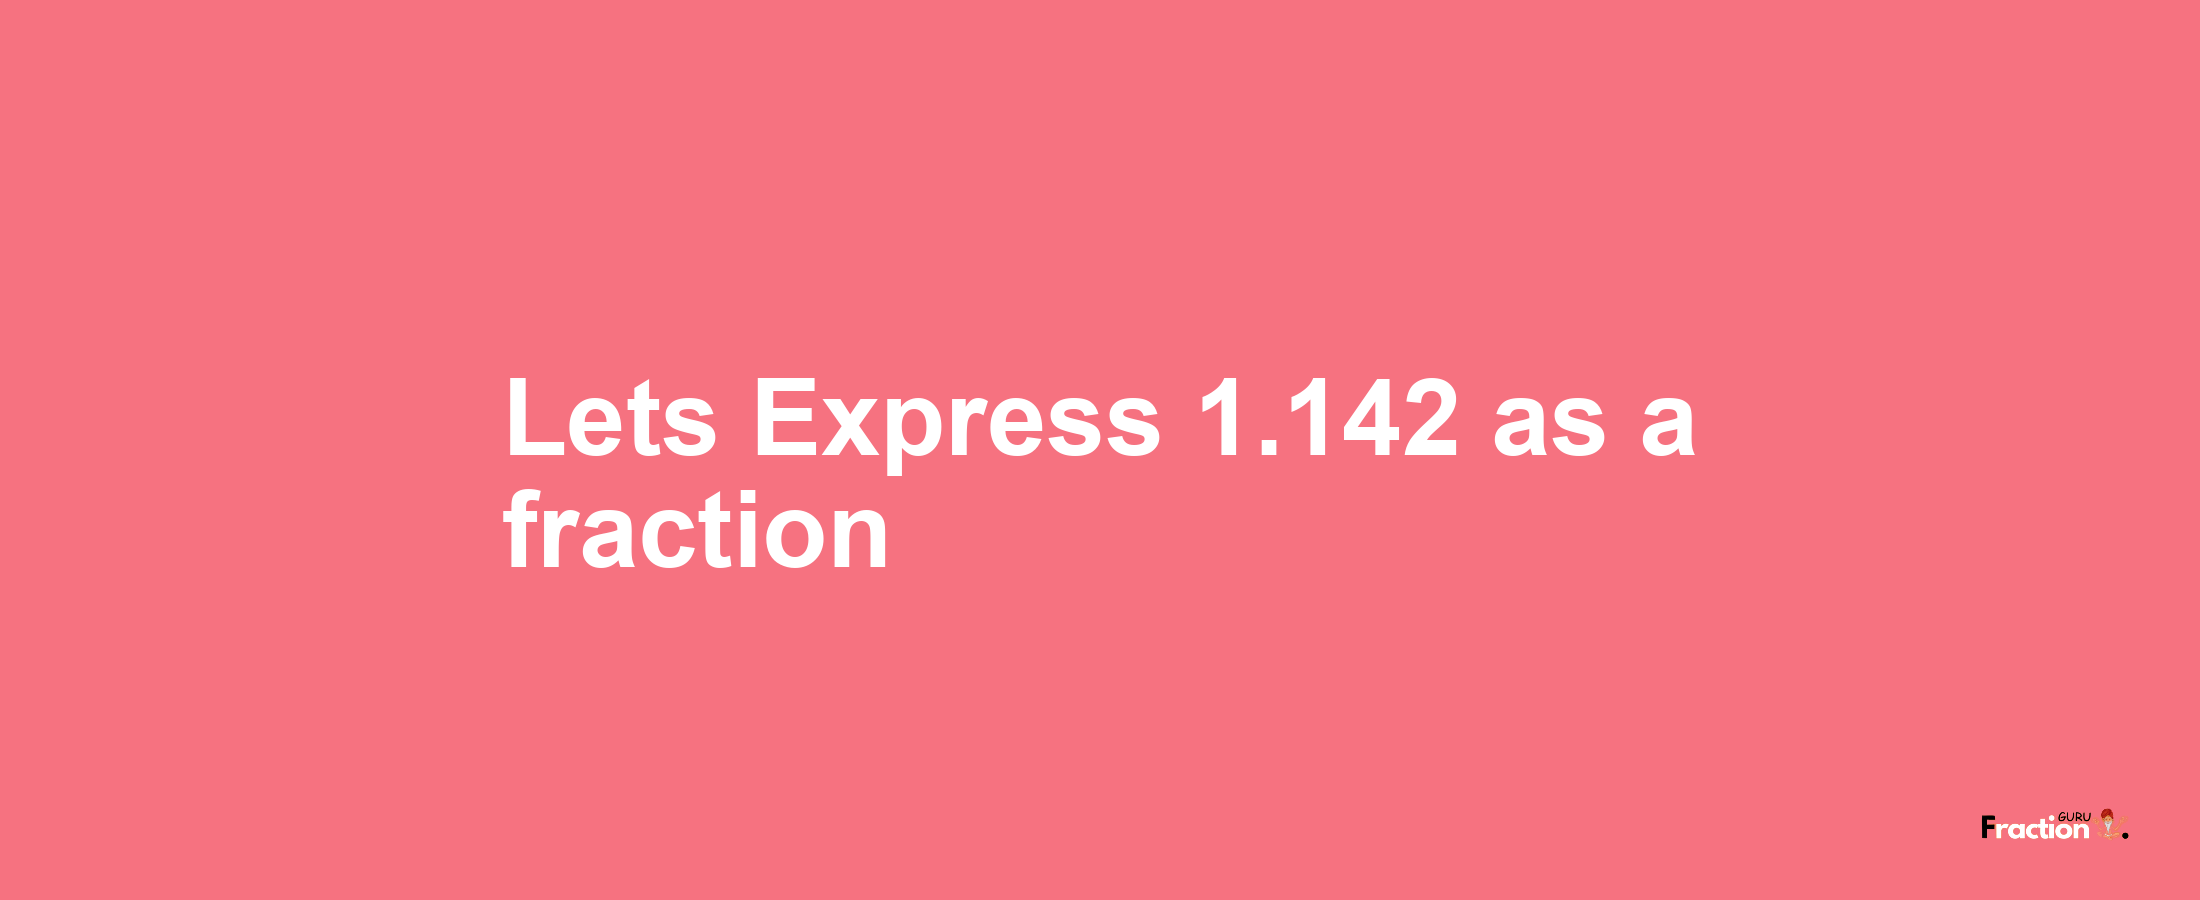 Lets Express 1.142 as afraction